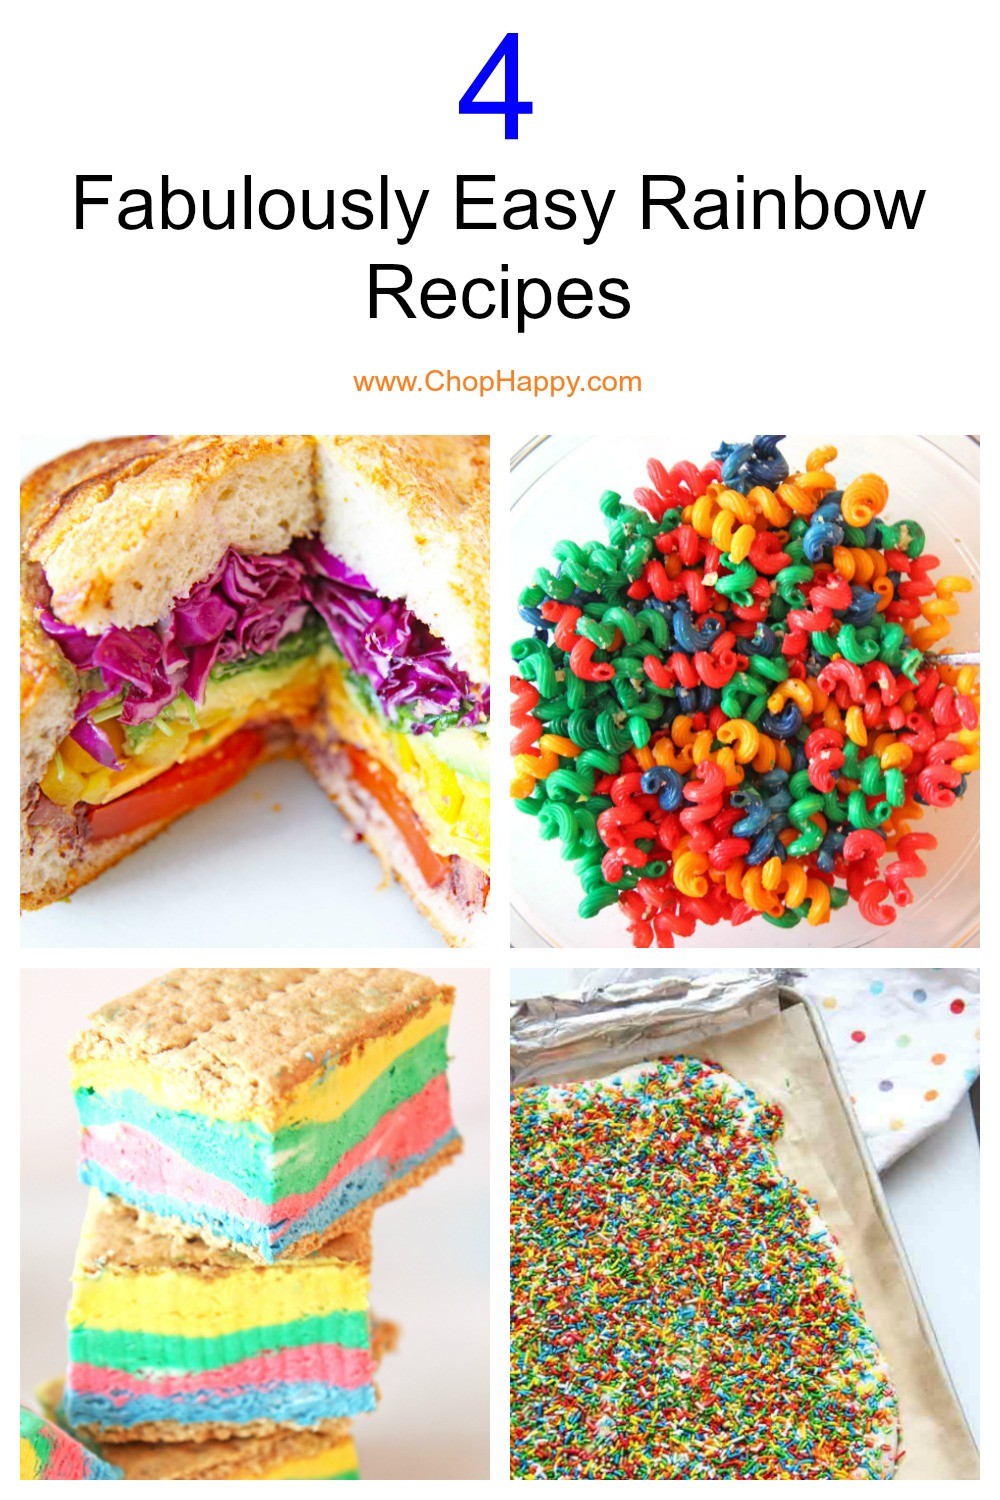 4 Fabulously Easy Rainbow Recipes. Grab the rainbow desserts and sandwich recipes and get ready for fun eating. Happy Cooking! #rainbowrecipes #rainbowdesserts